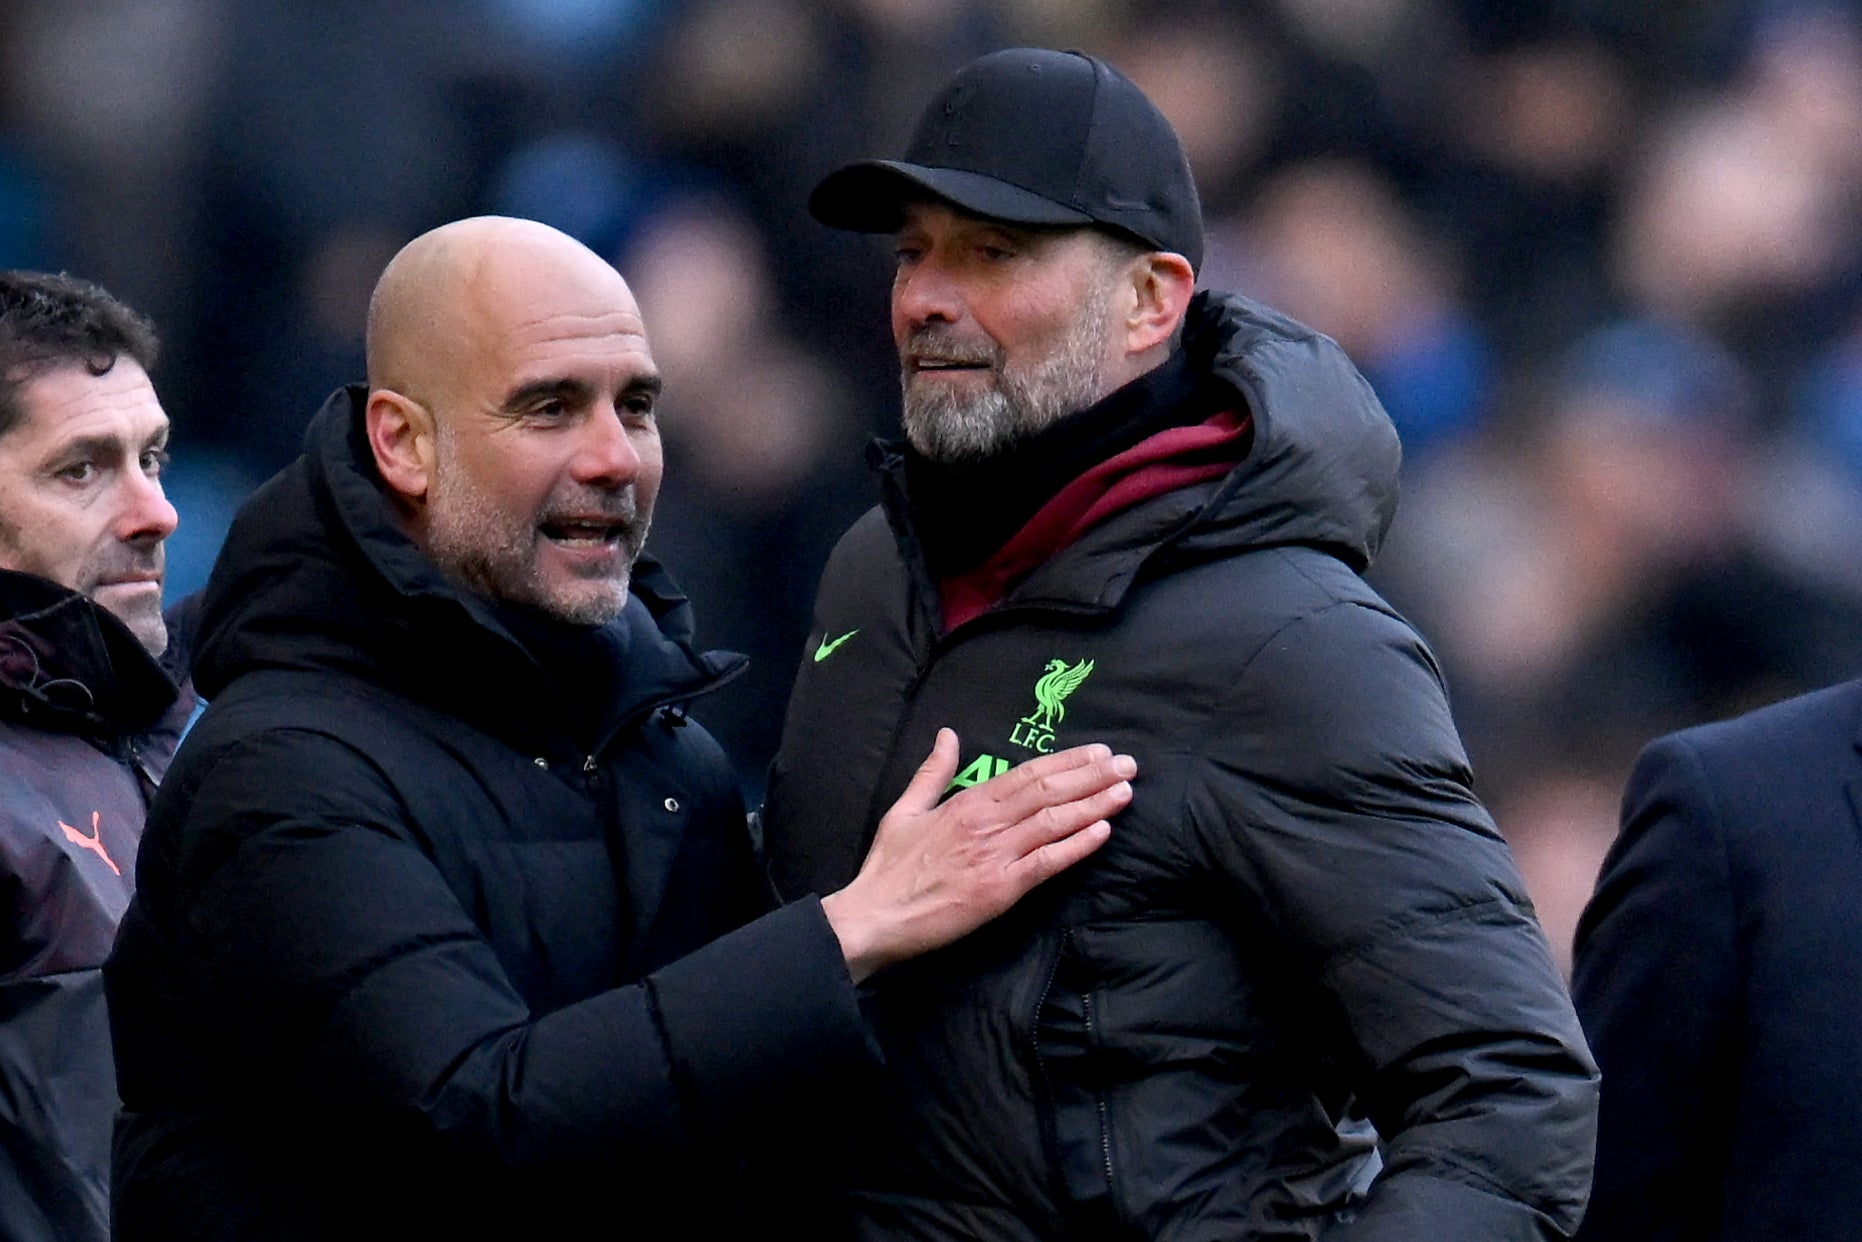 Klopp and Guardiola have had an intense rivalry